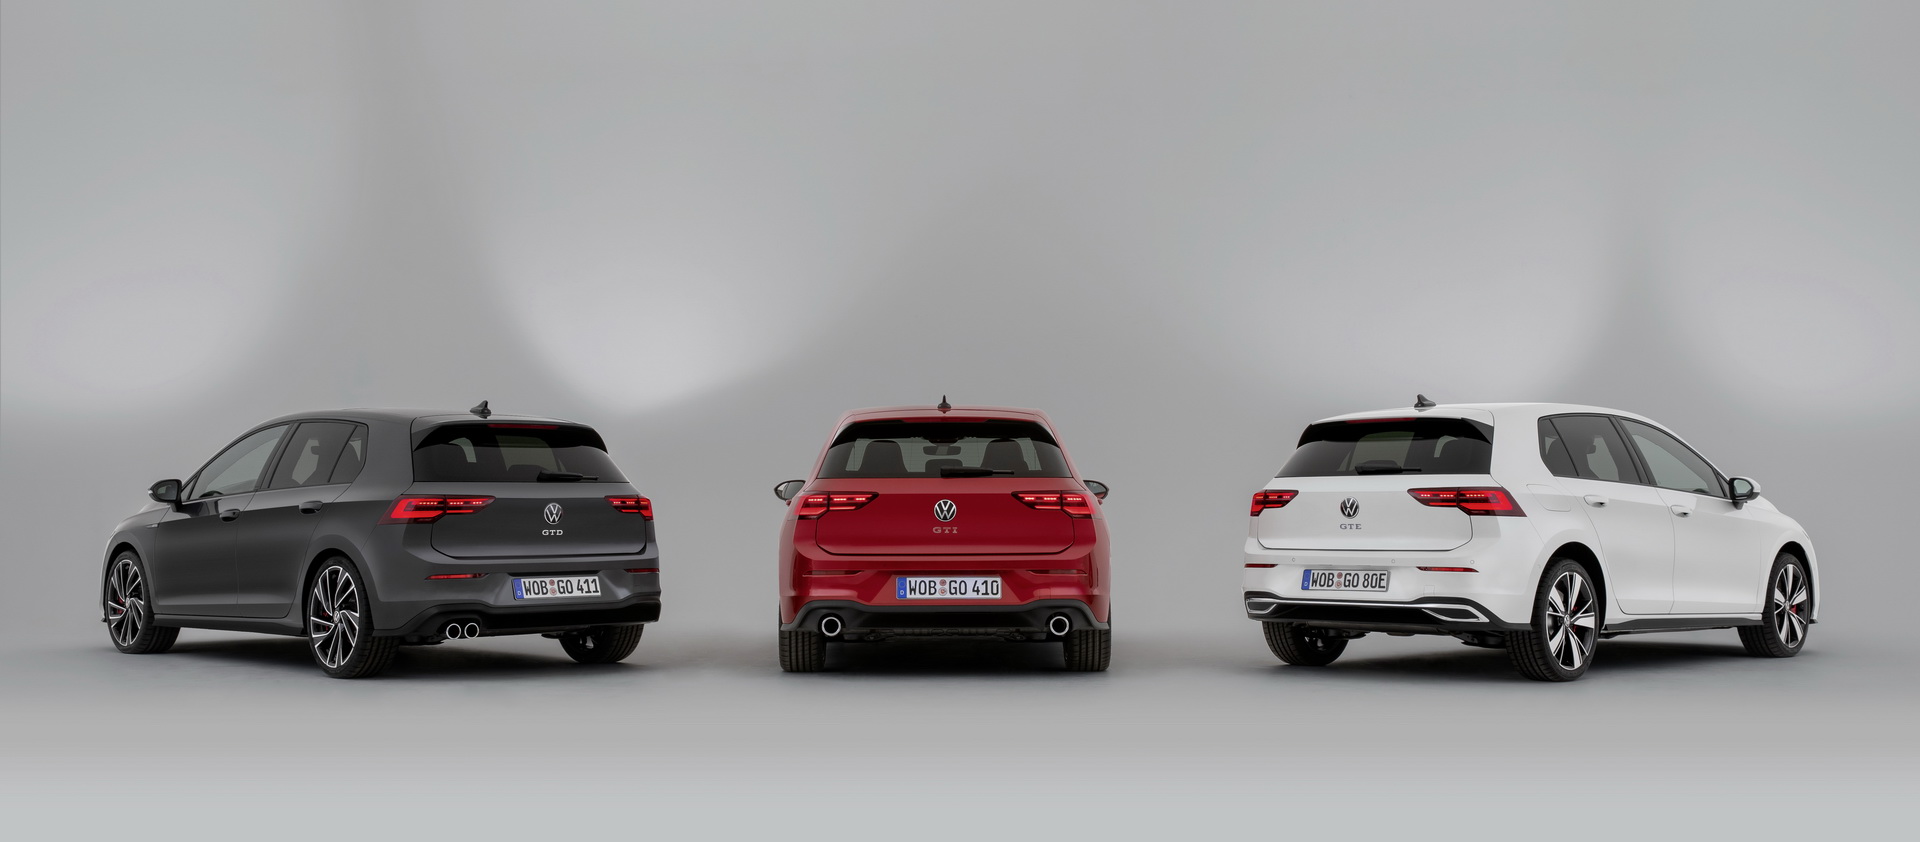 2021 VW Golf GTI Mk8 Is Here With 242 HP, And So Are The GTE And